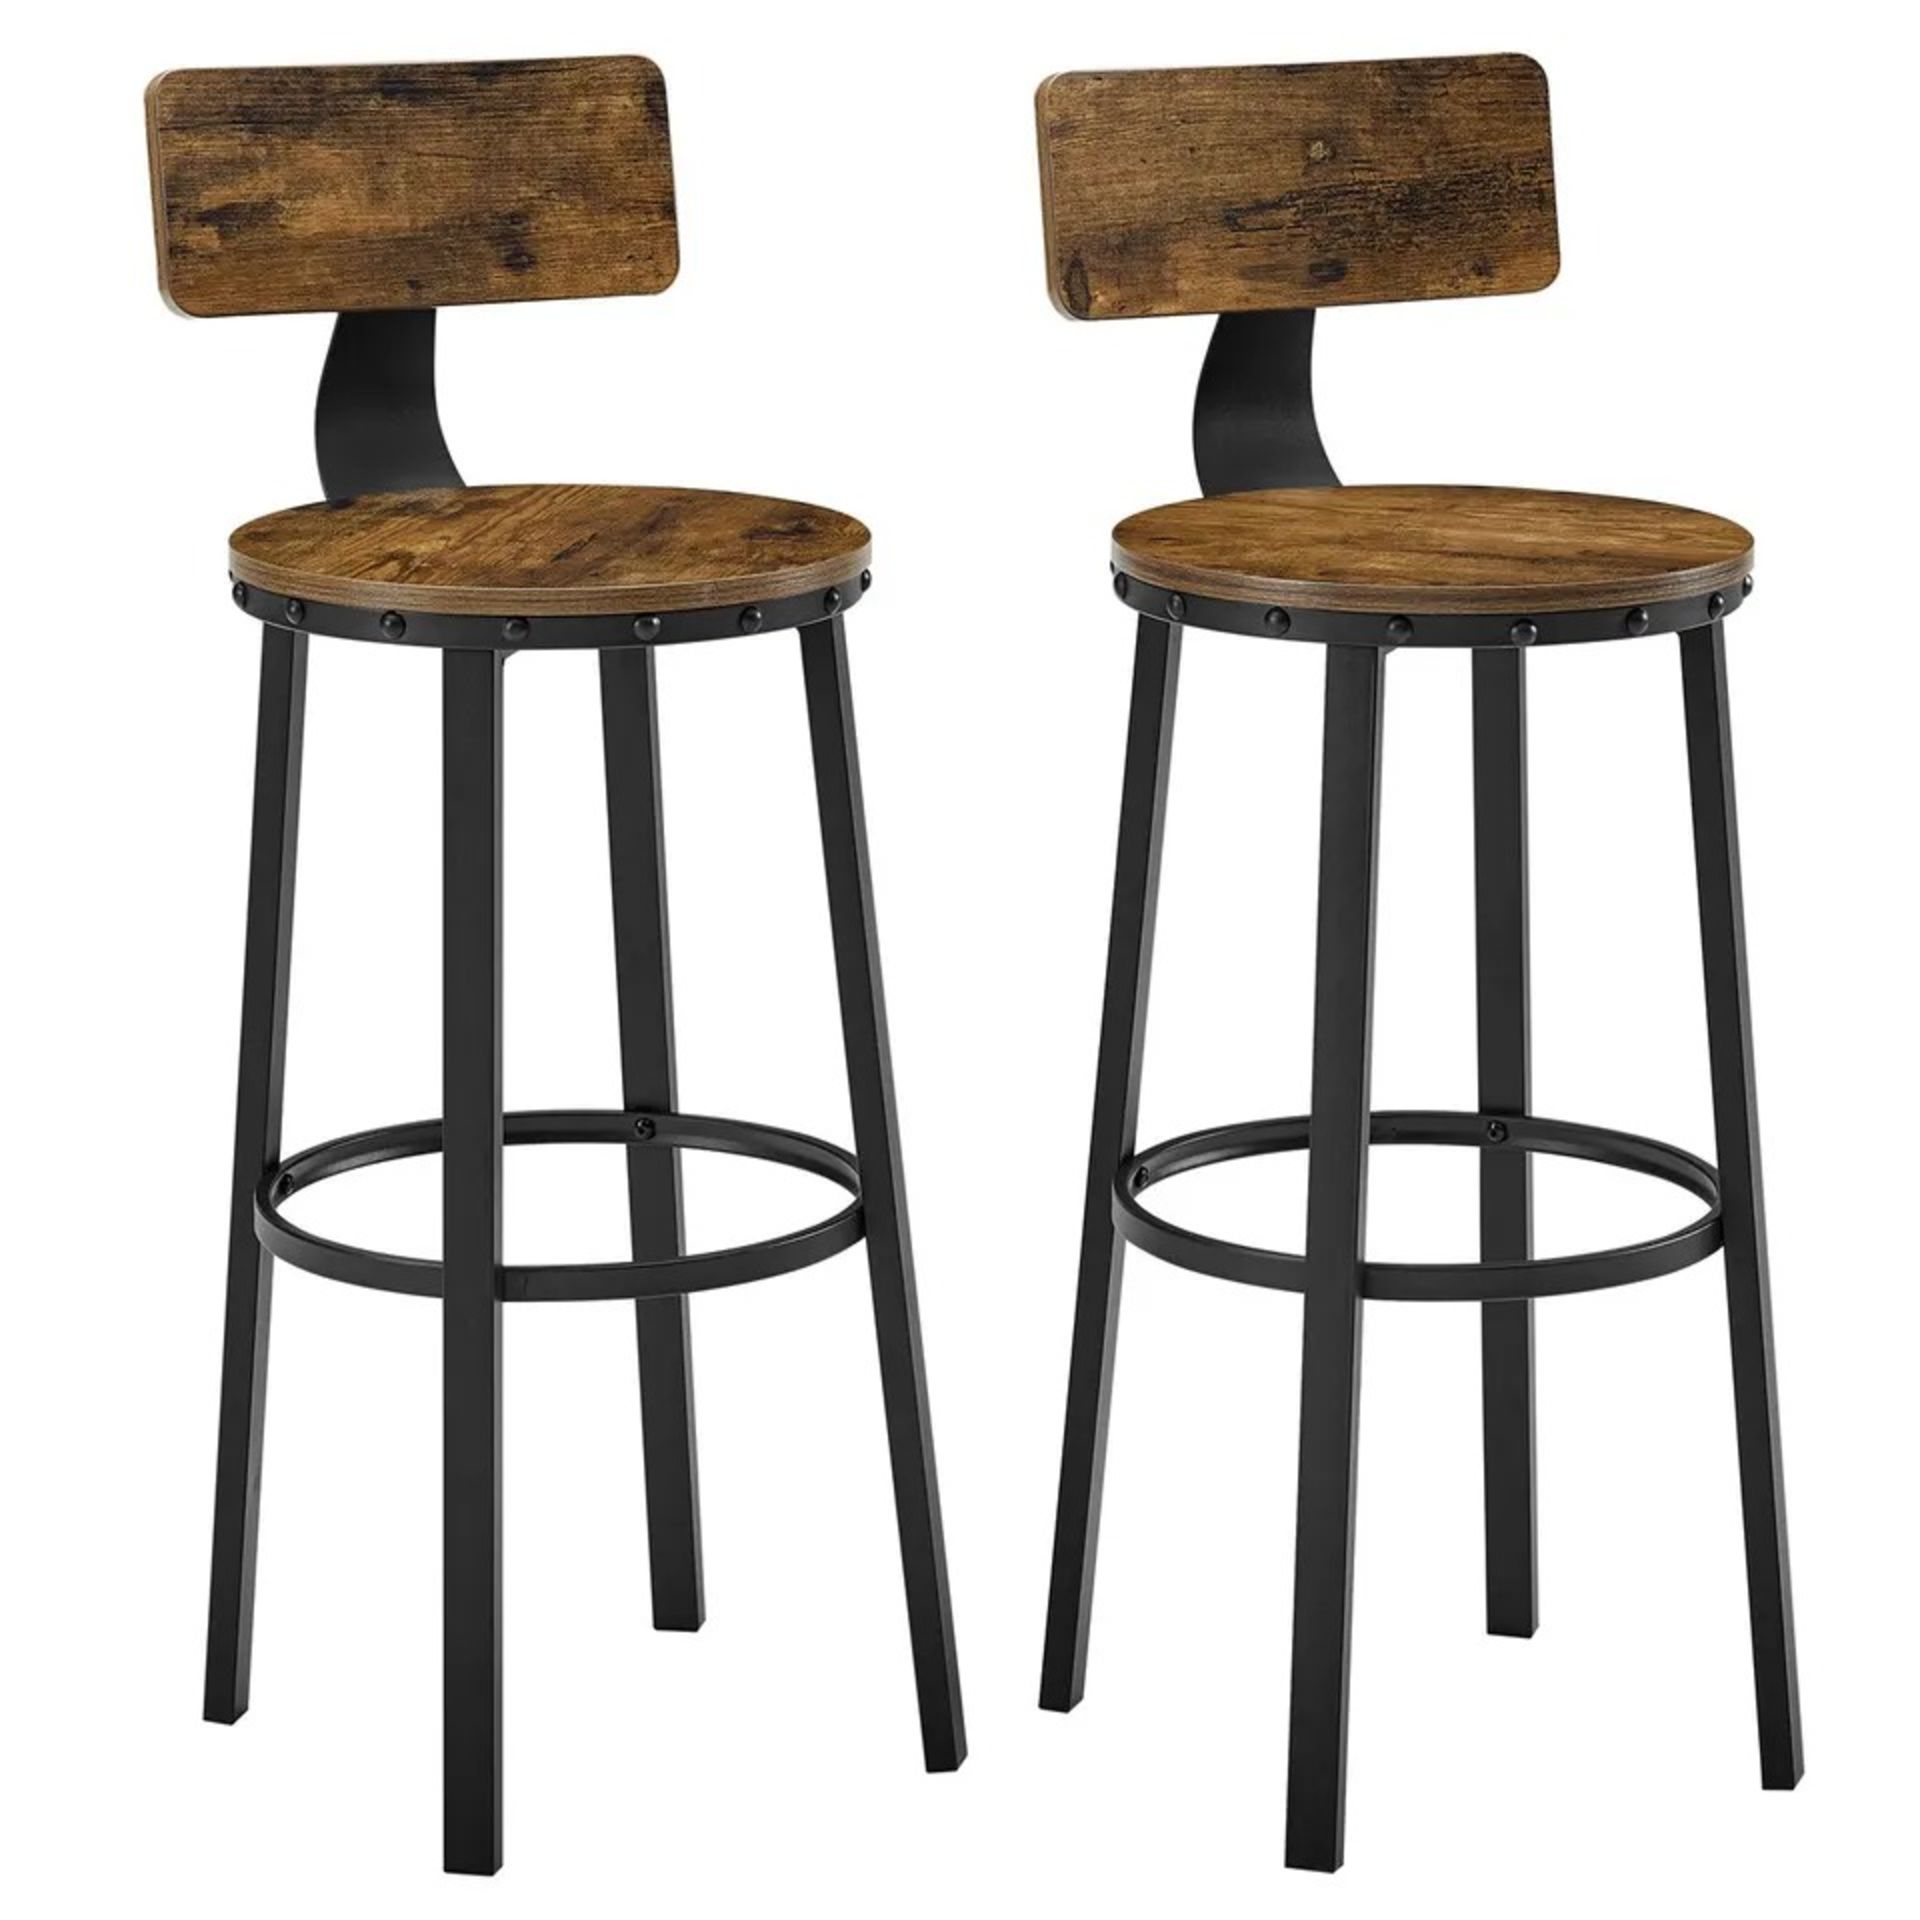 FREE DELIVERY - BRAND NEW SET OF 2 TALL BAR STOOLS, BAR CHAIRS WITH BACKREST